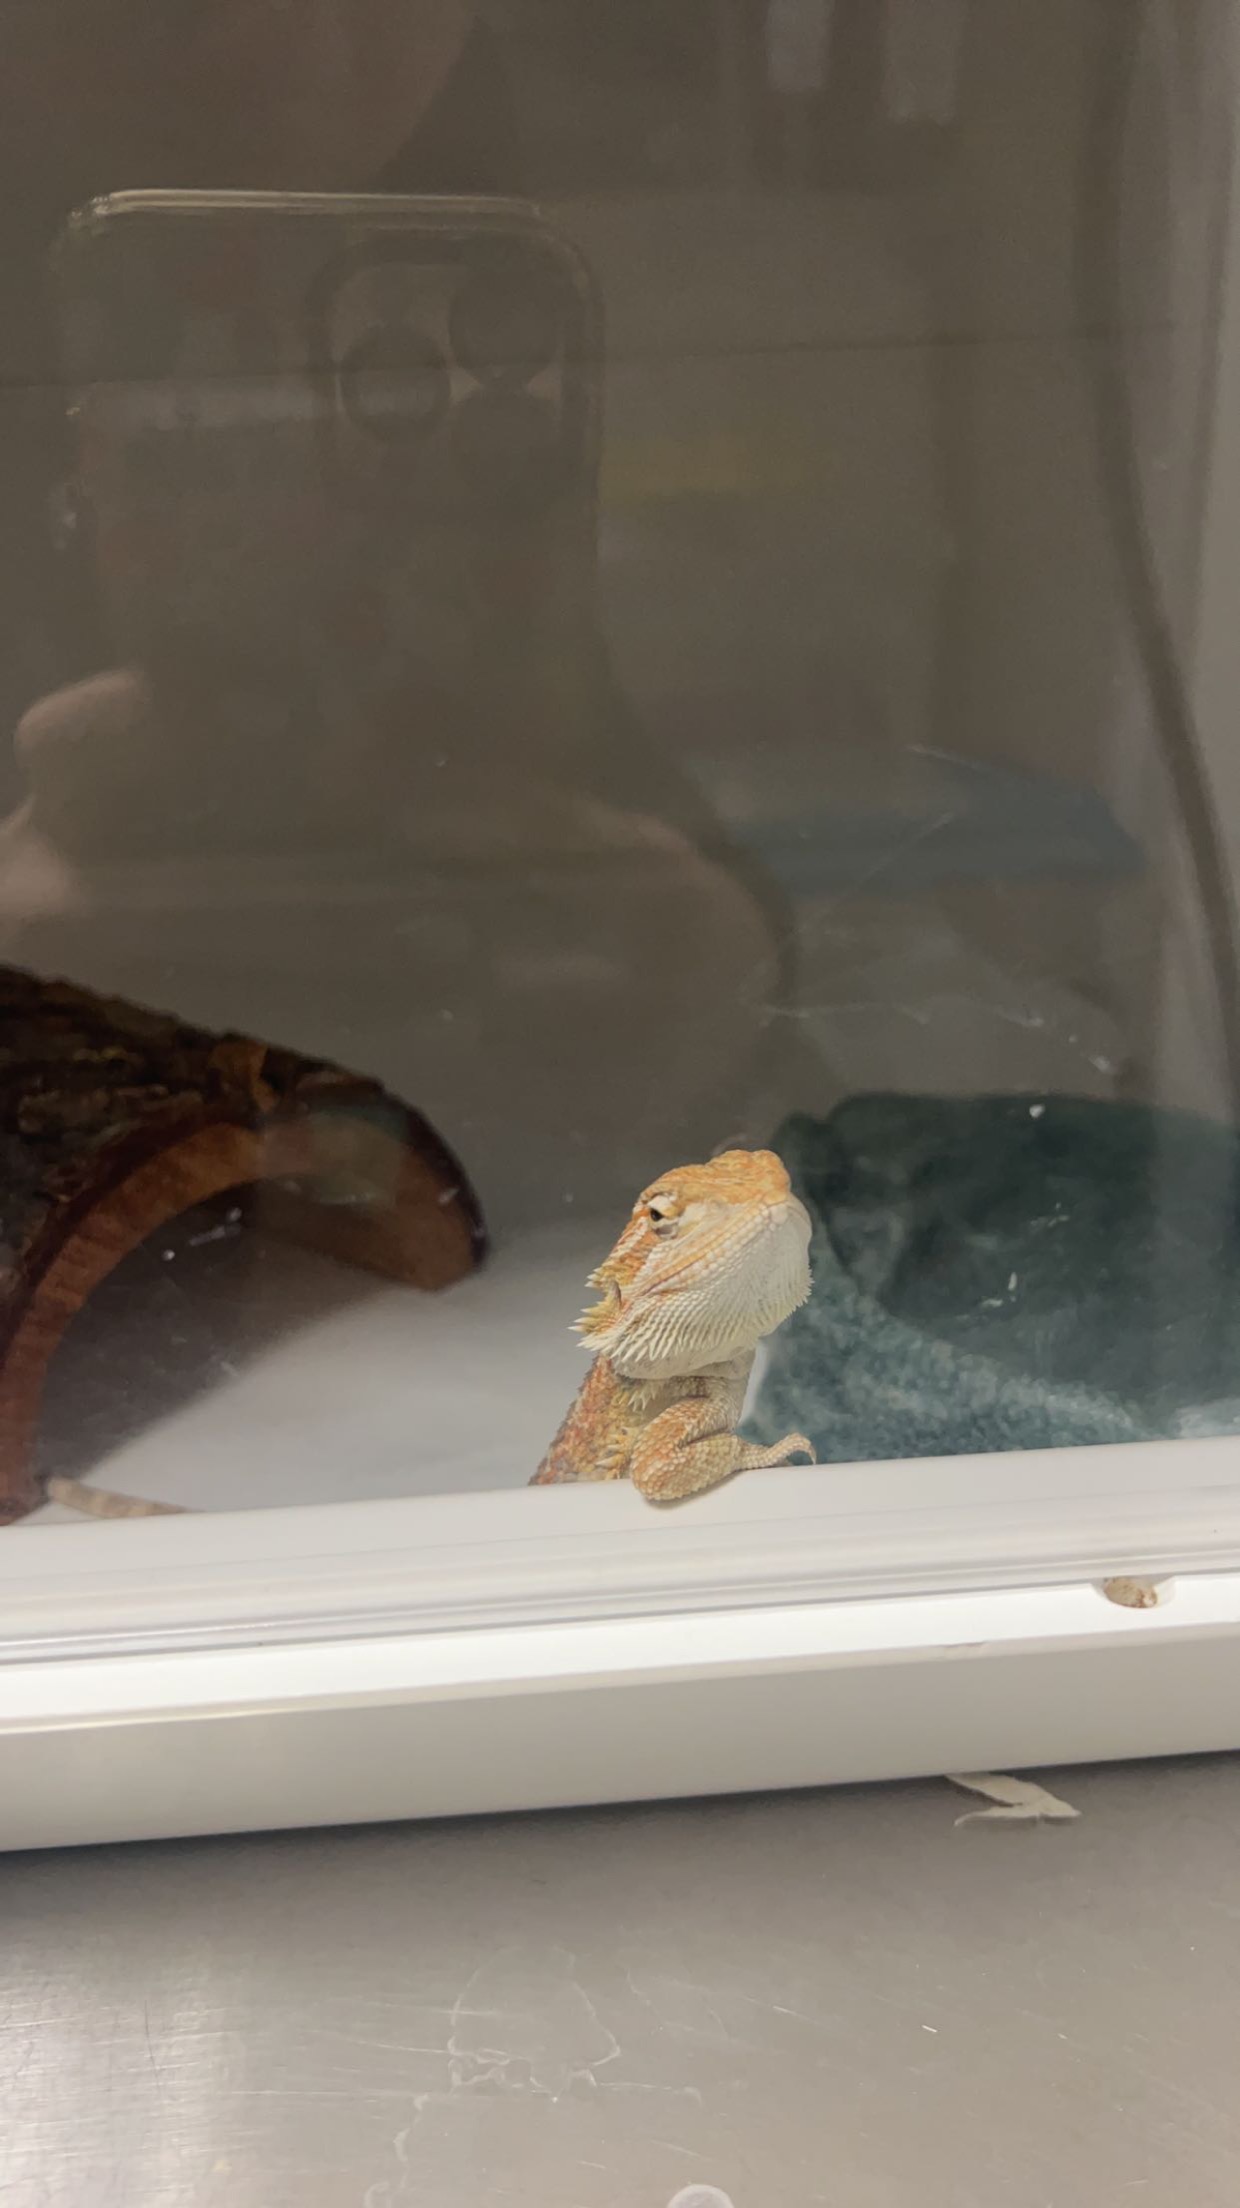 An Iguana placed on a glass cage with wood